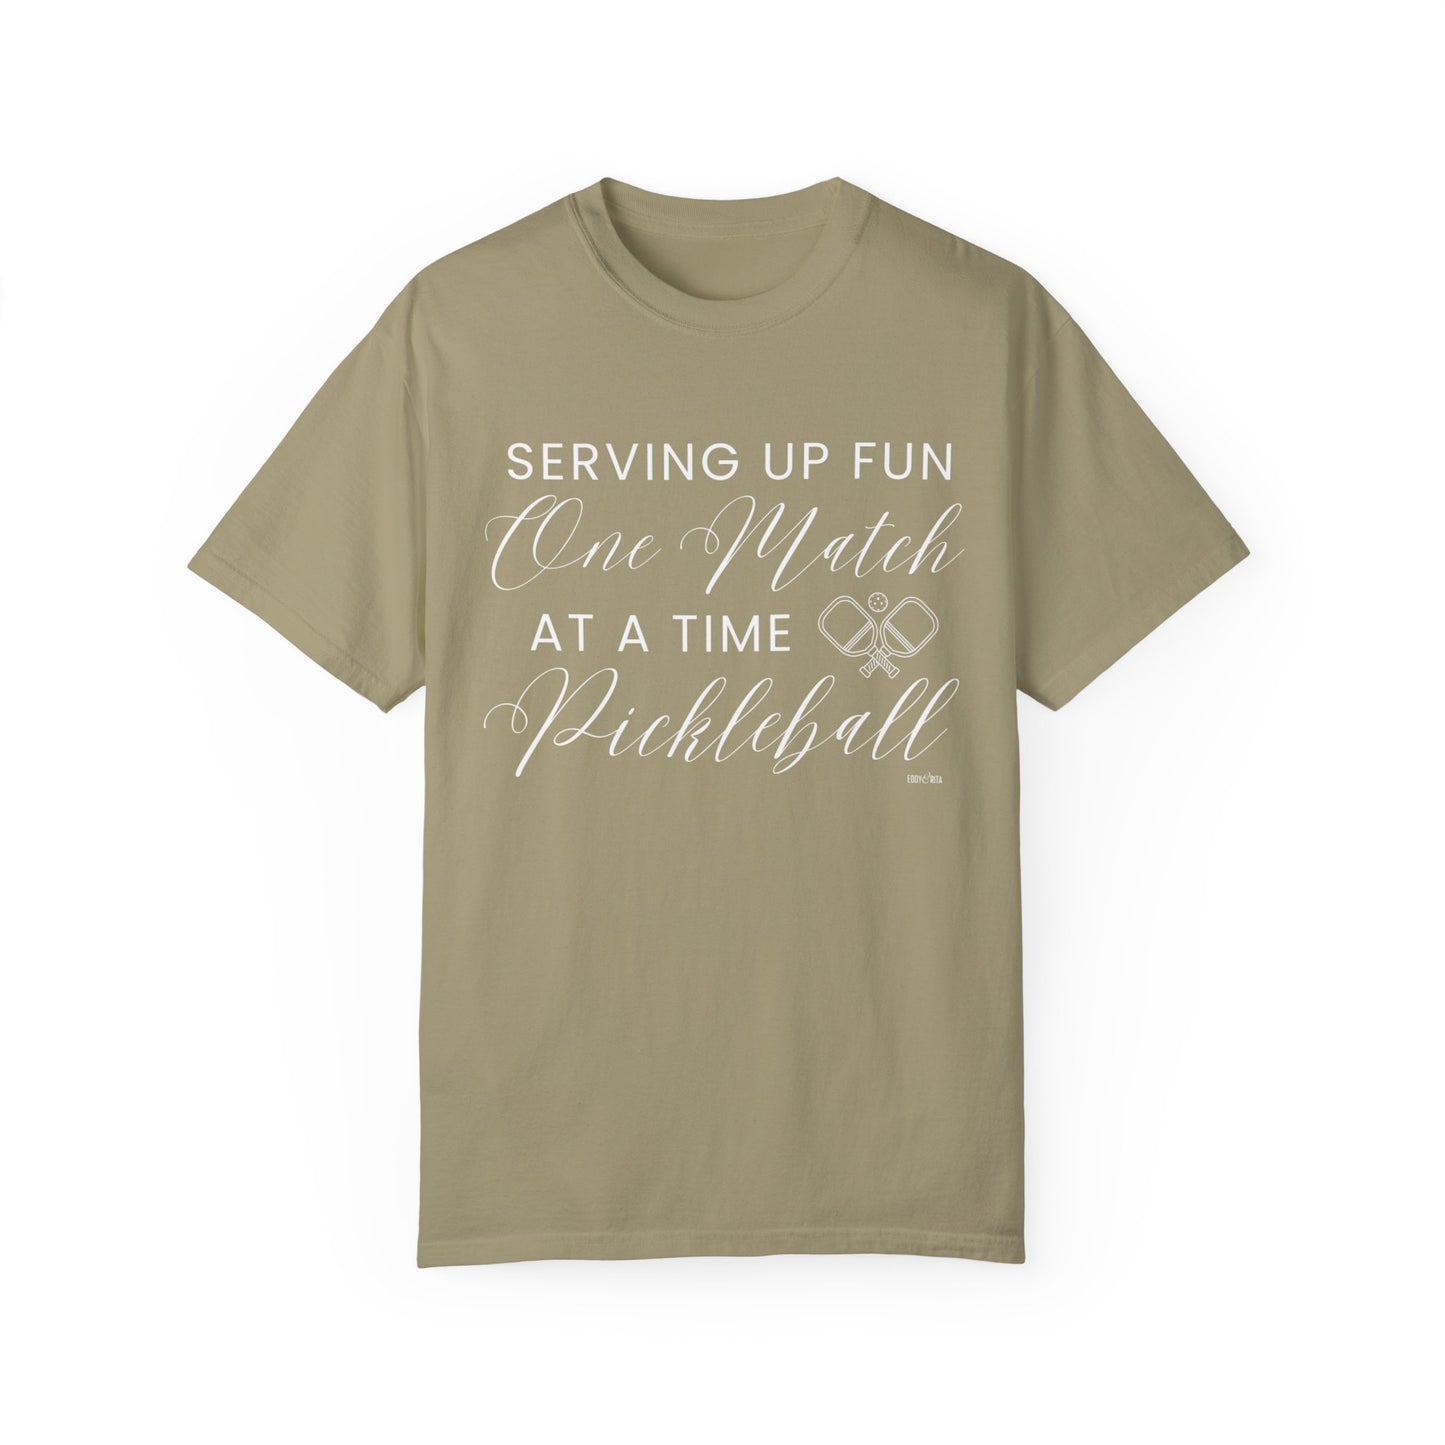 Eddy and Rita Women's Comfort Colors T-Shirt - "Serving Up Fun One Match at a Time Pickleball" Colorful Graphic Tee for Pickleball Enthusiasts